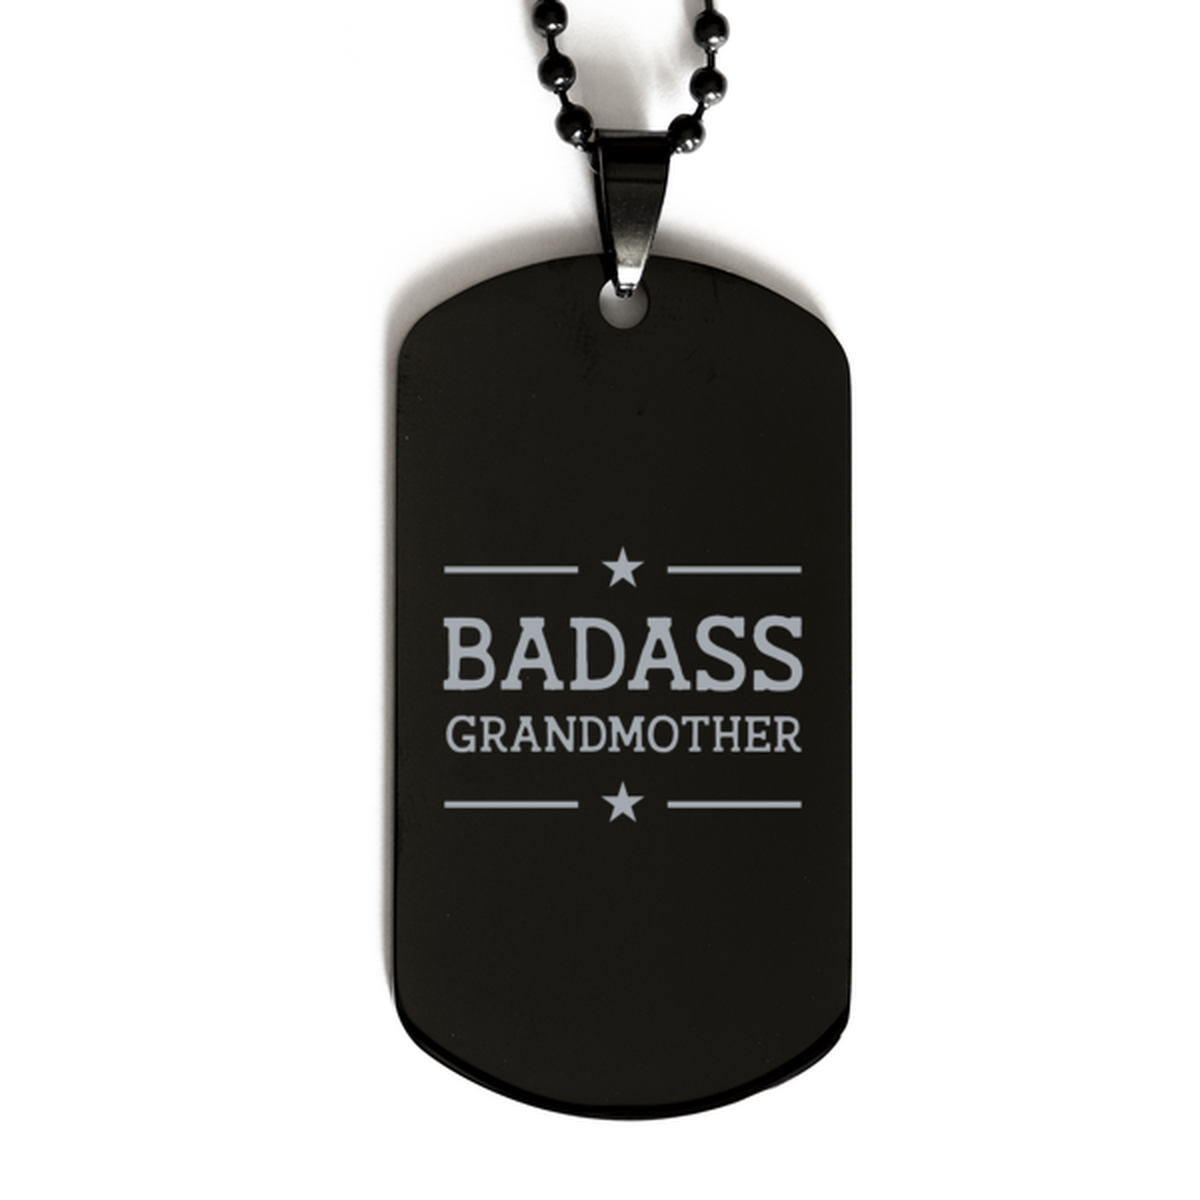 Grandmother Black Dog Tag, Badass Grandmother, Funny Family Gifts  Necklace For Grandmother From Granddaughter Grandson